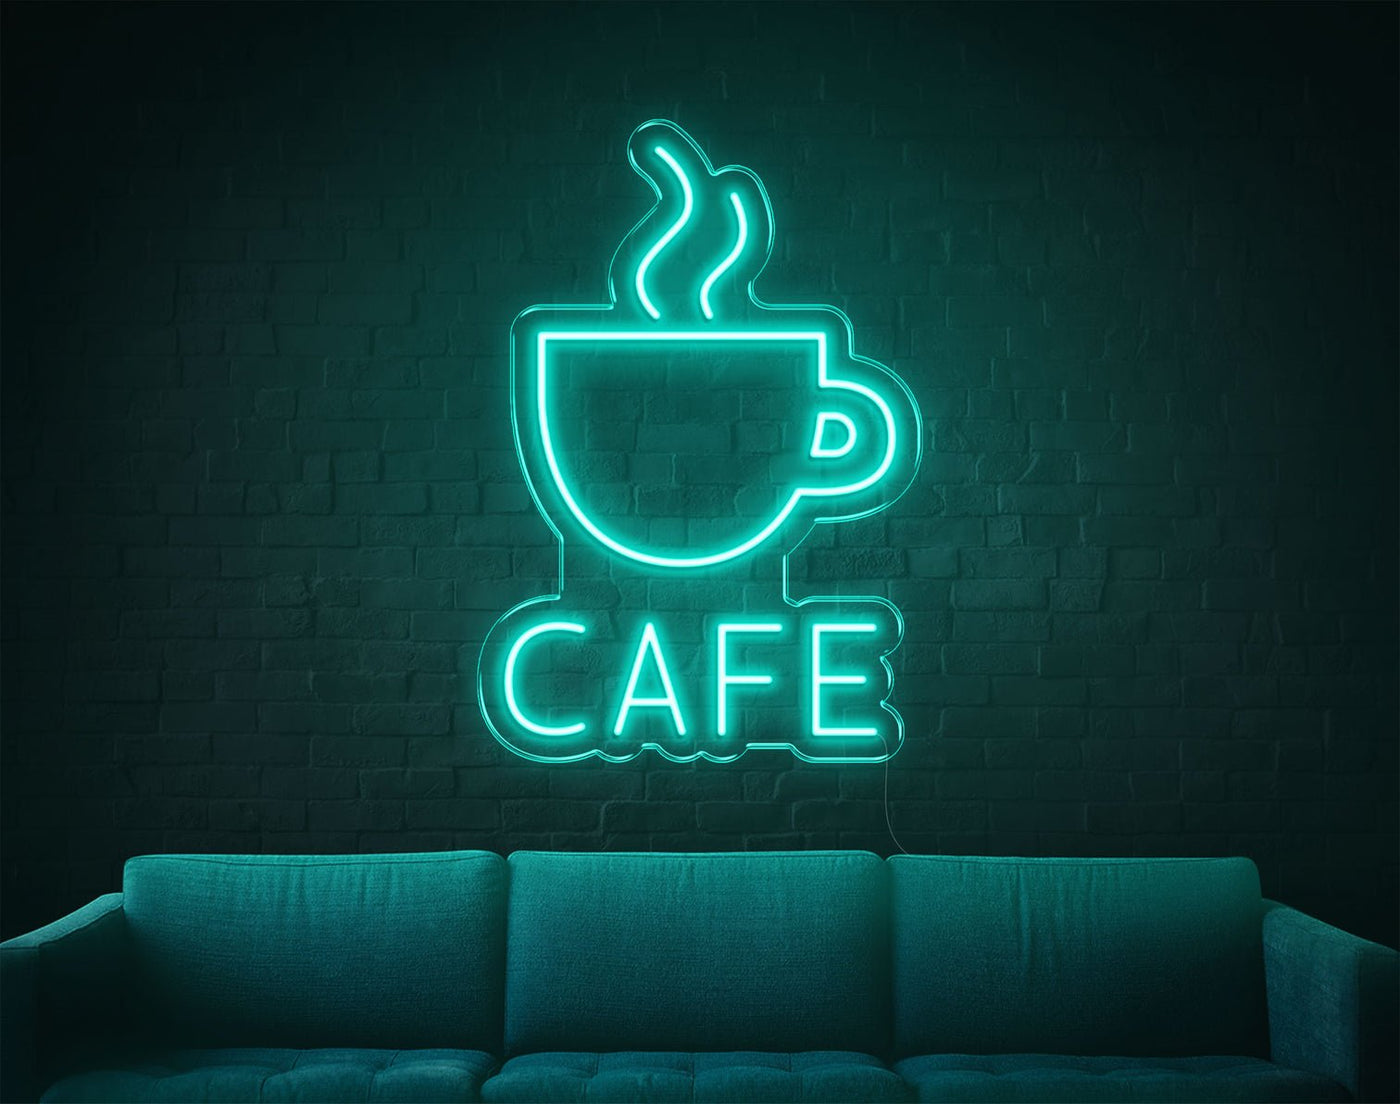 Cafe LED Neon Sign - 25inch x 17inchTurquoise